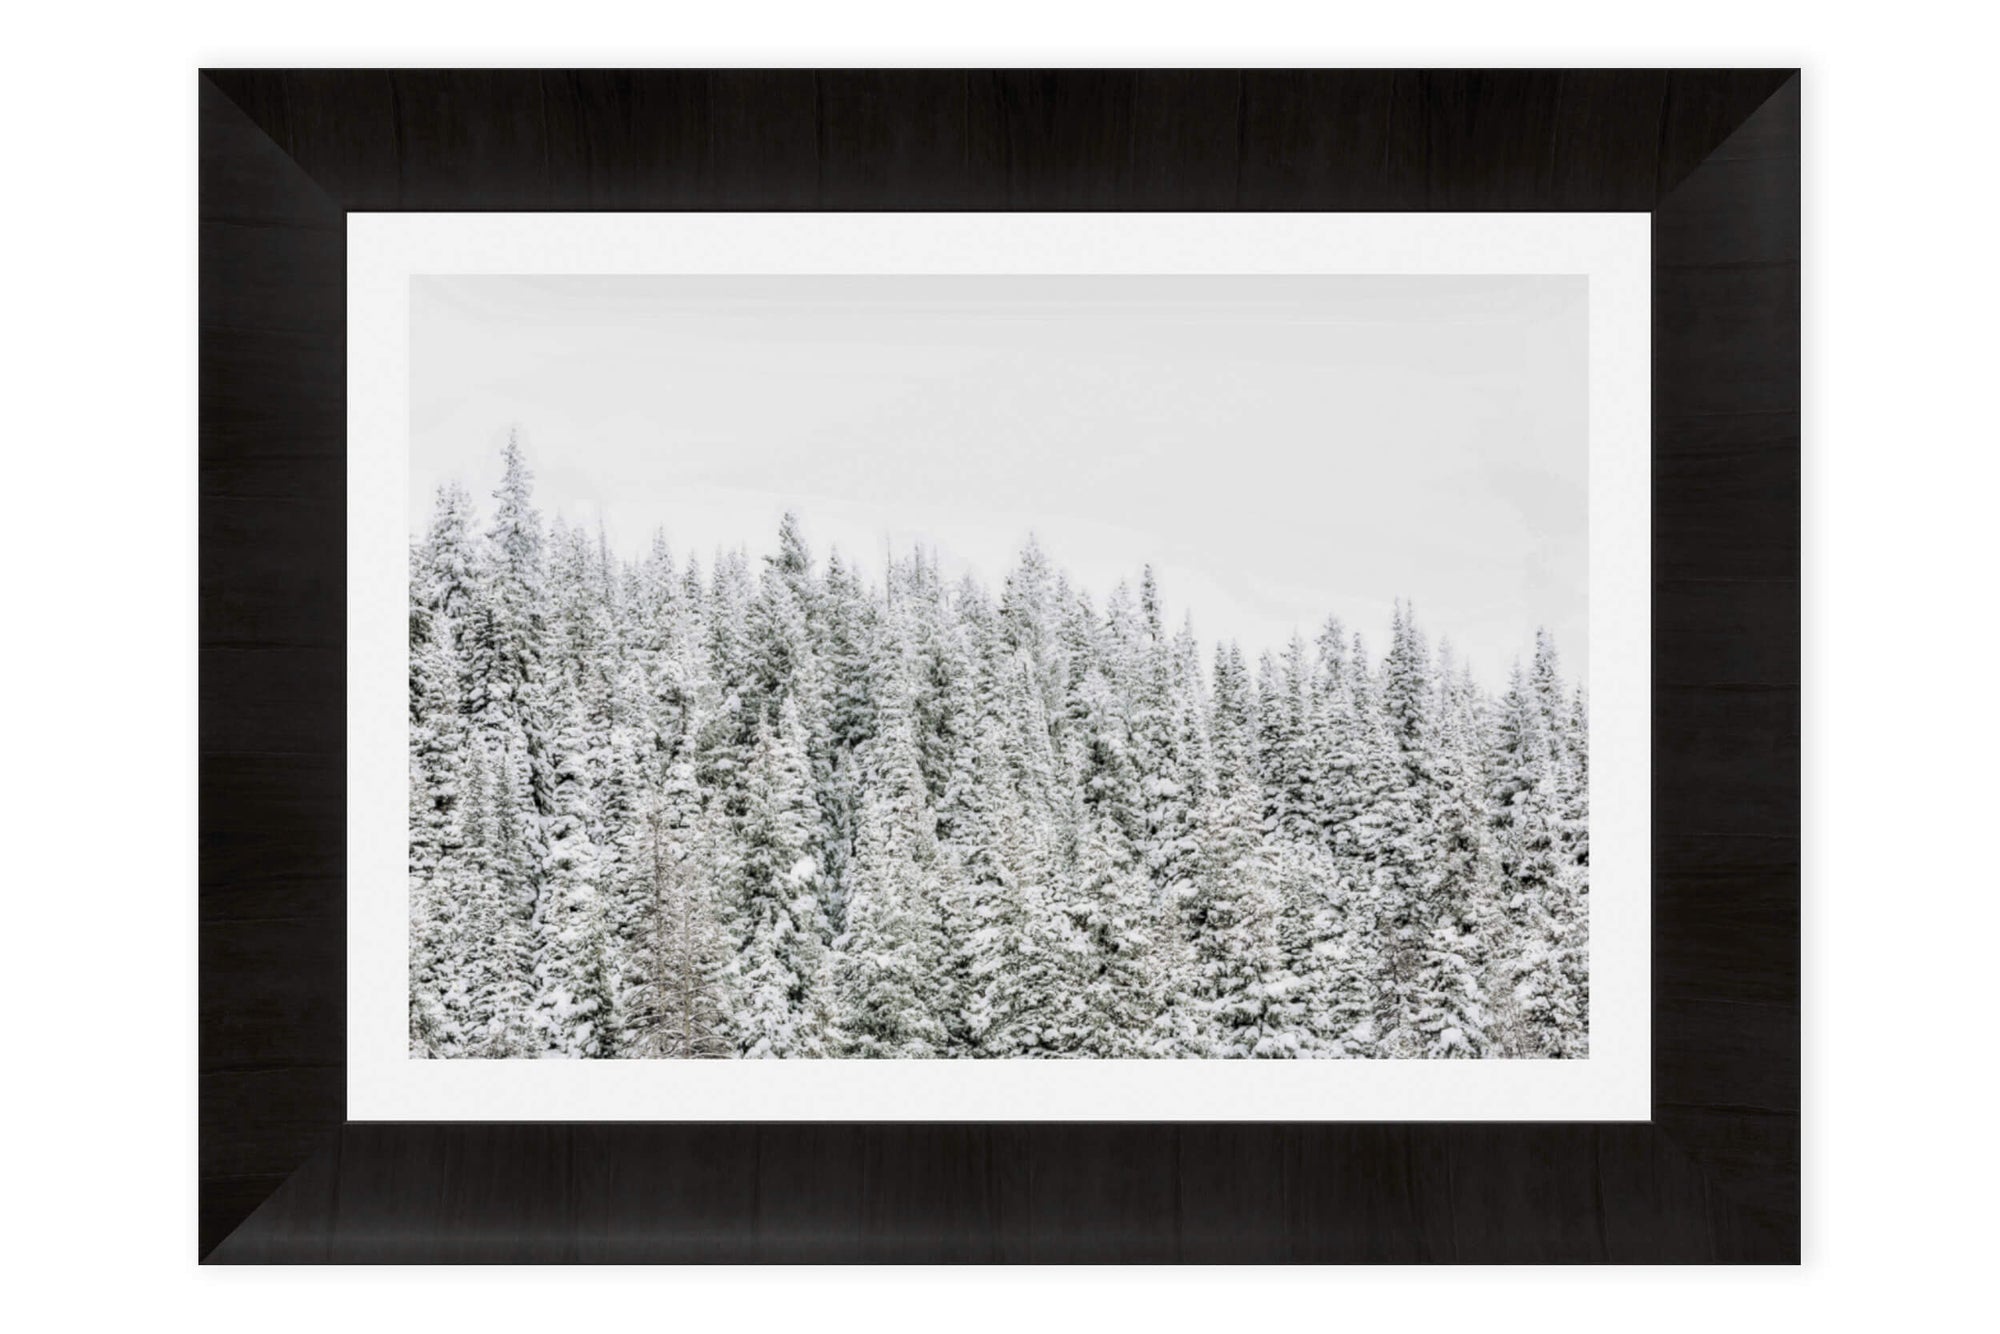 This piece of framed Steamboat Springs art shows trees in the snow outside the Colorado ski resort.